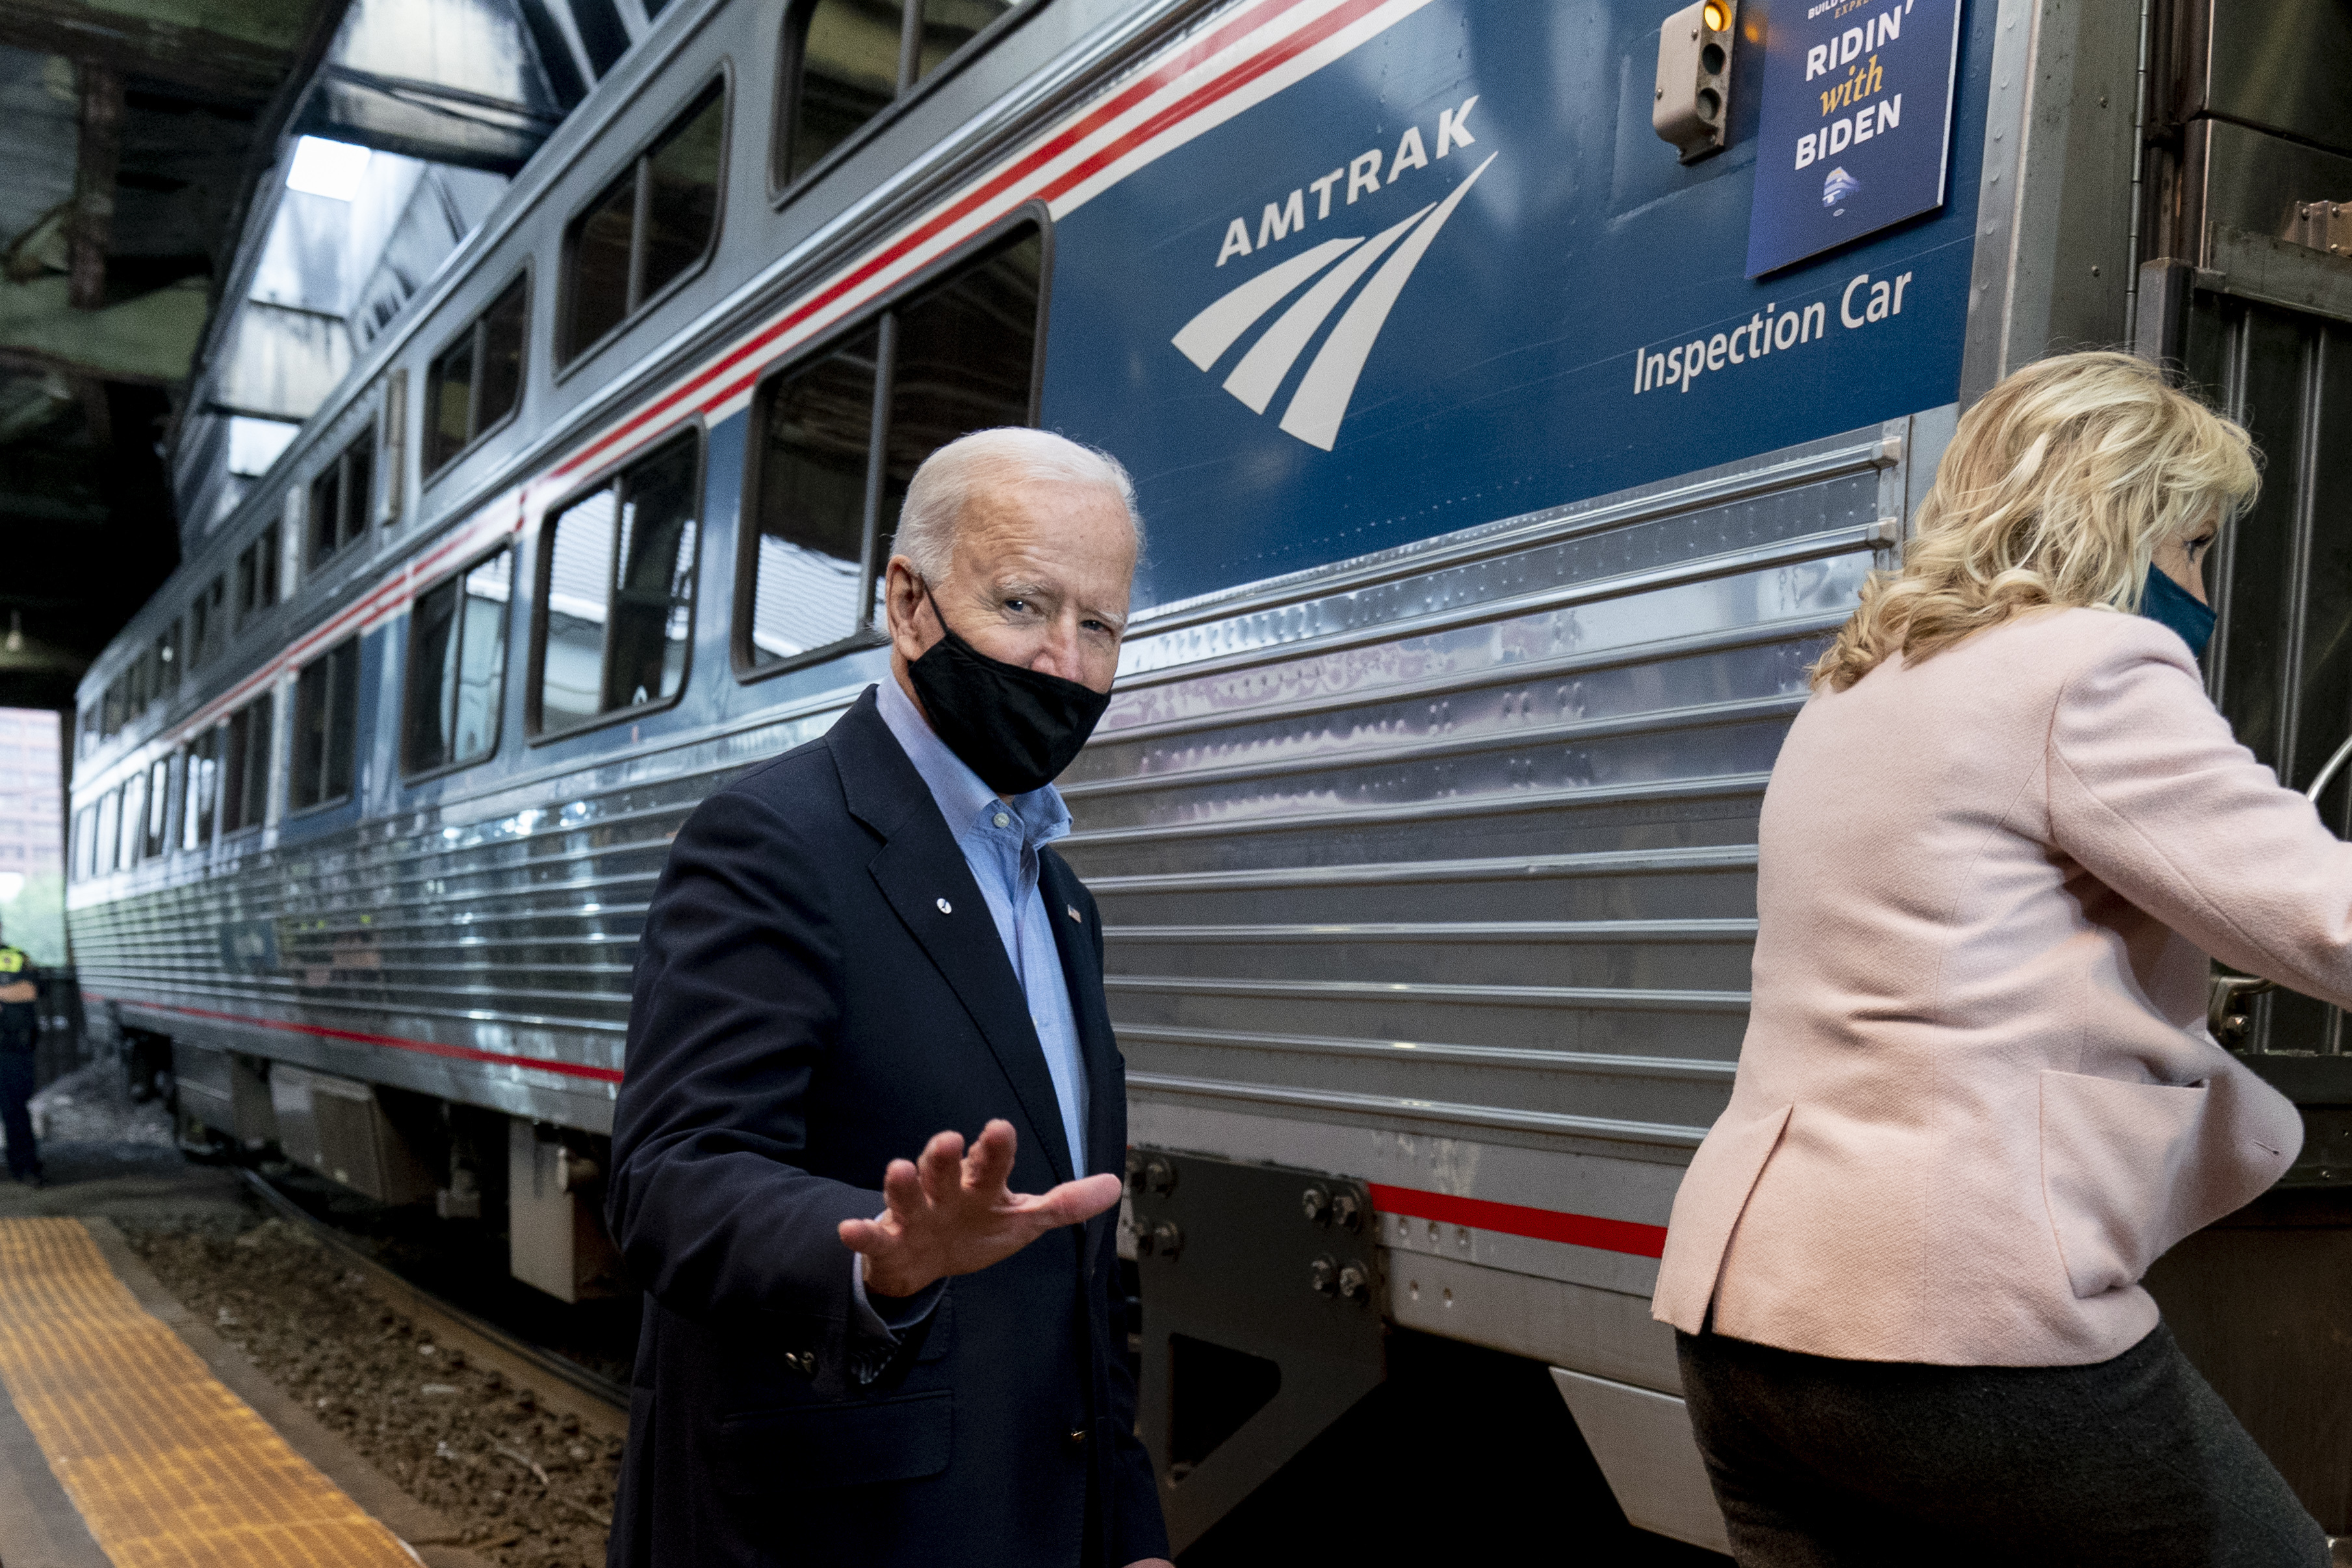 Sept. 26-Oct. 2 Explained: Biden's Train Ride, Learning Hubs & Navigating Loss During The Pandemic | 90.5 WESA